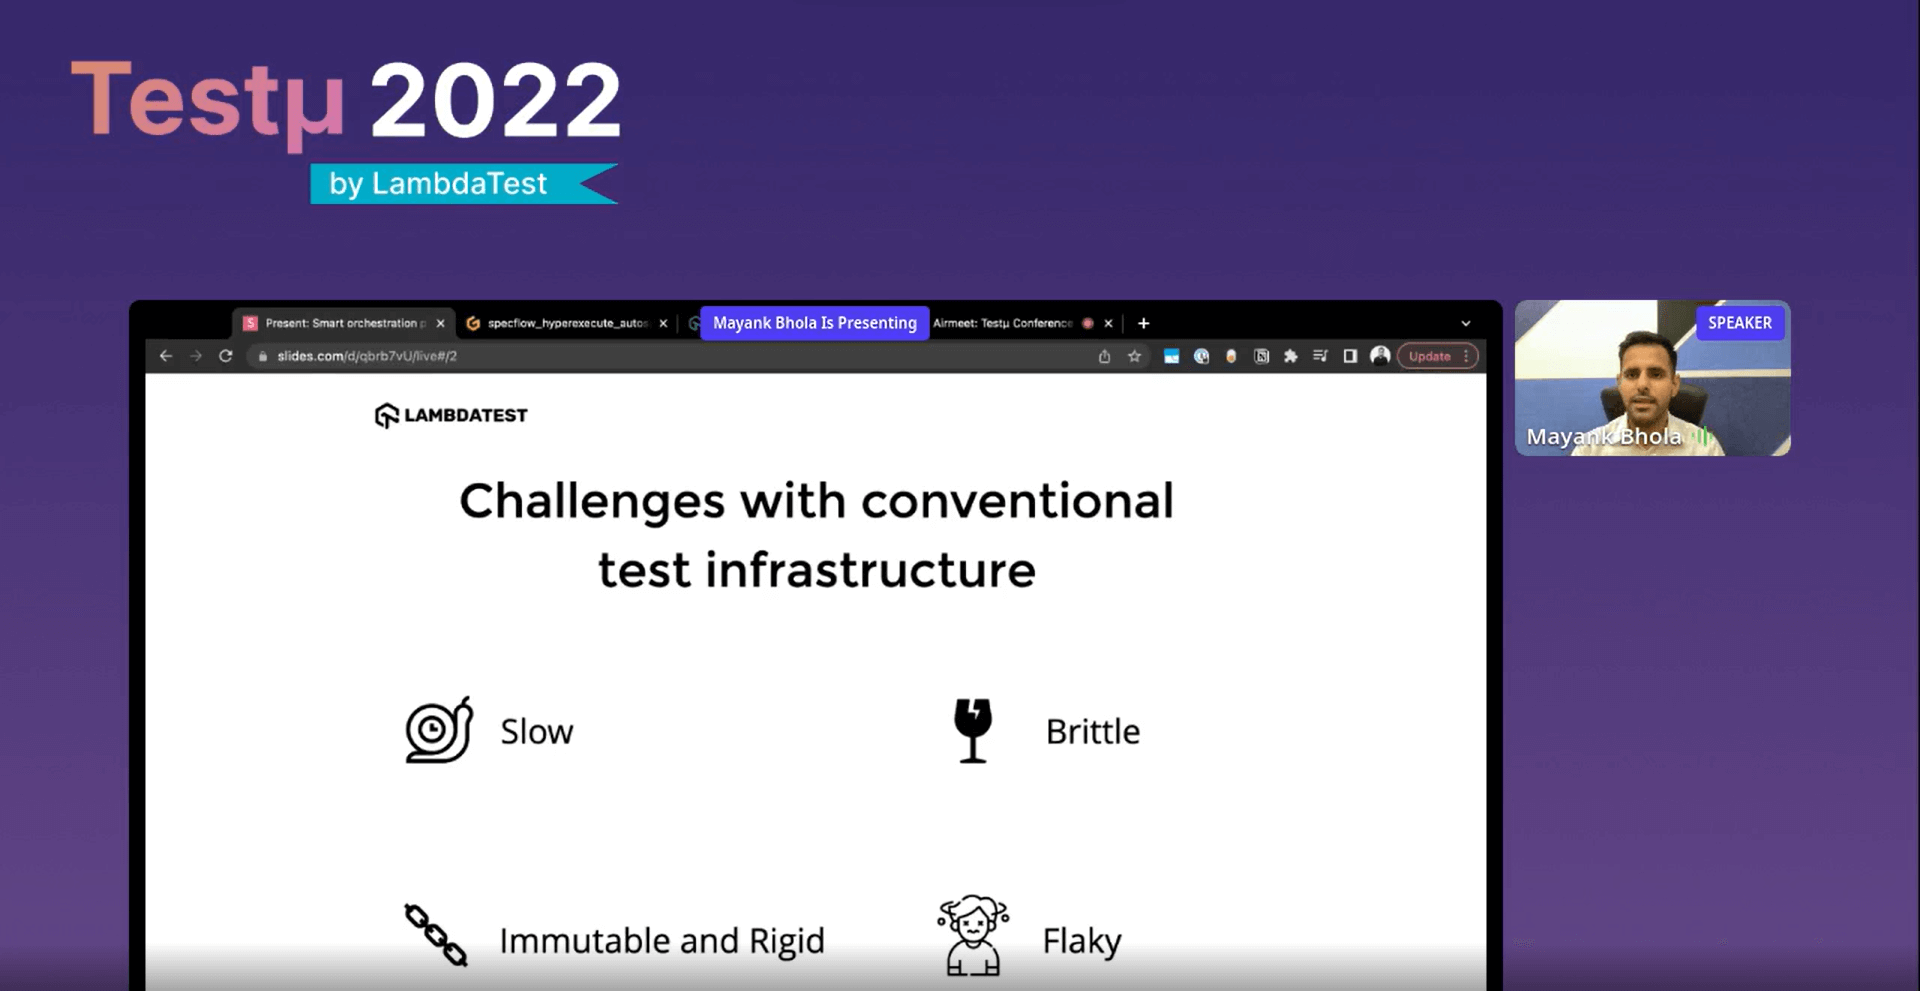 Challenges with conventional test infrastructure